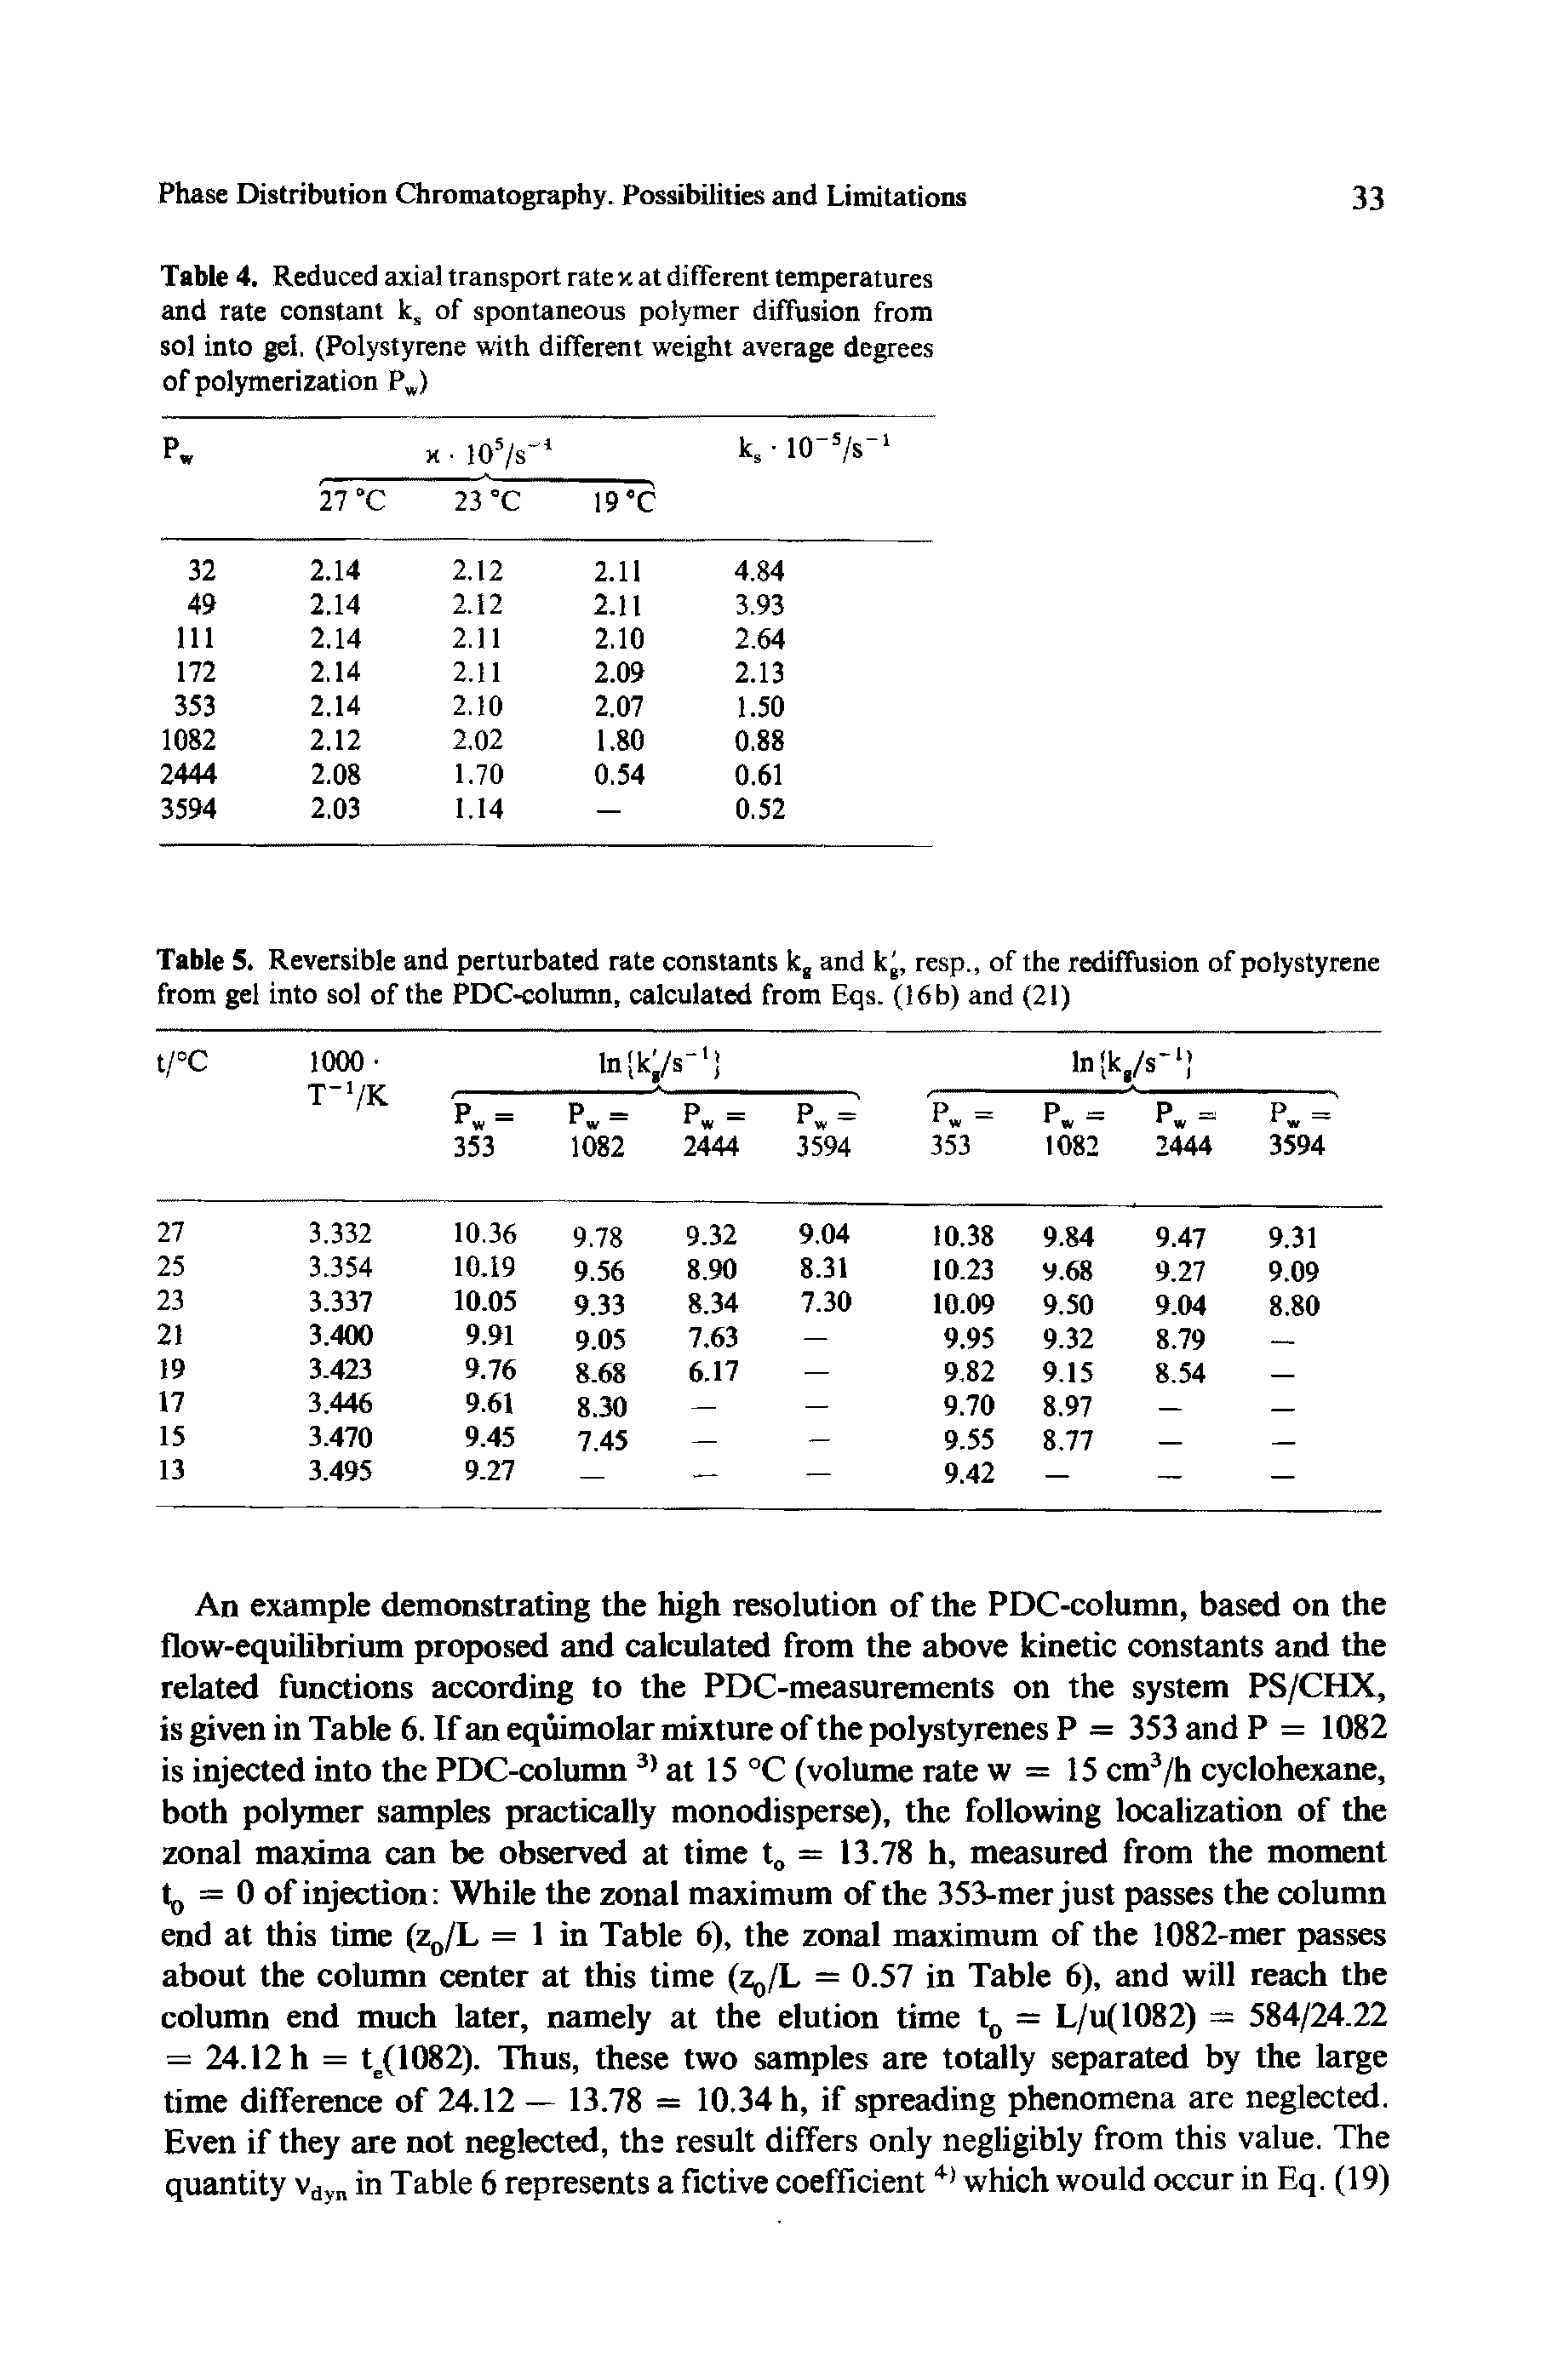 Table 5. Reversible and perturbated rate constants kg and k, resp., of the rediffusion of polystyrene from gel into sol of the PDC-column, calculated from Eqs. (16 b) and (21)...